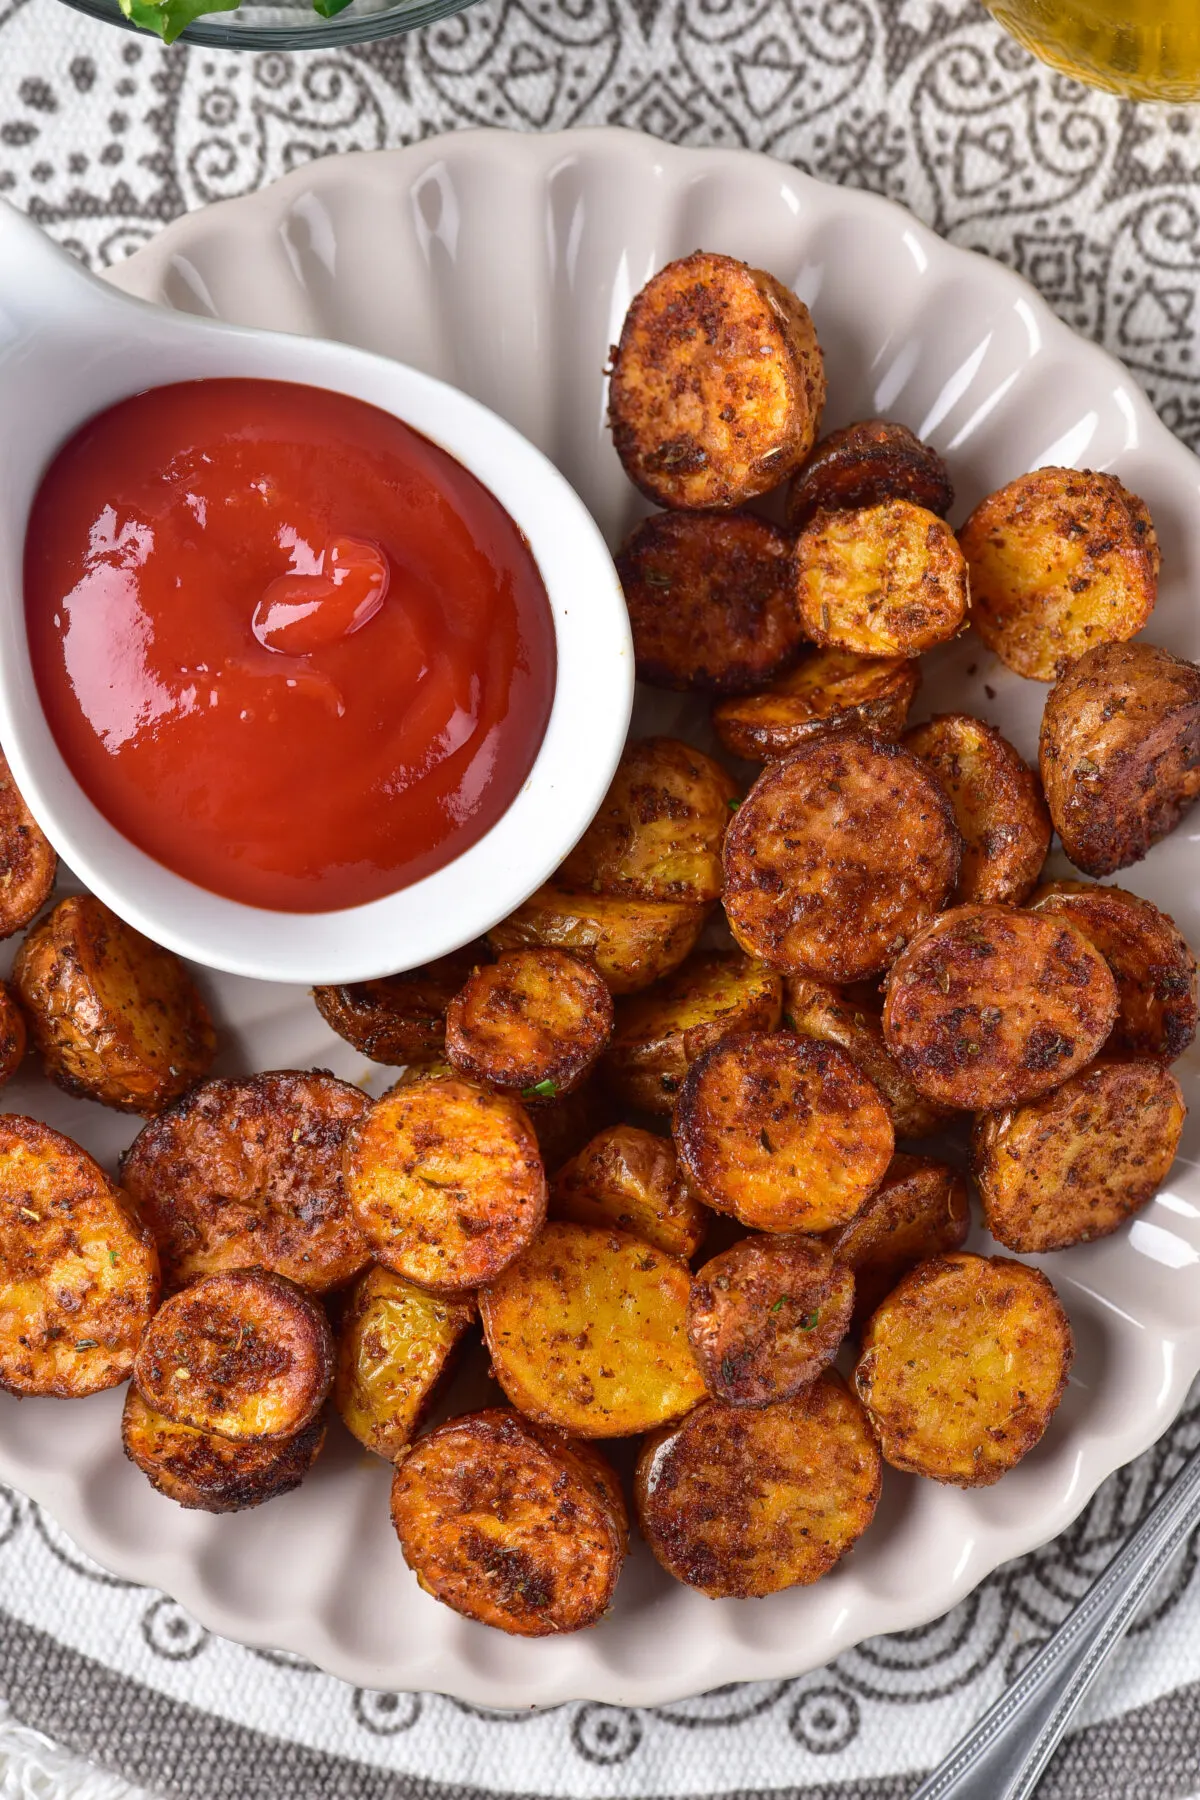 These air fryer baby potatoes are the perfect easy side dish for any meal! They're crispy, delicious, and so easy to make.